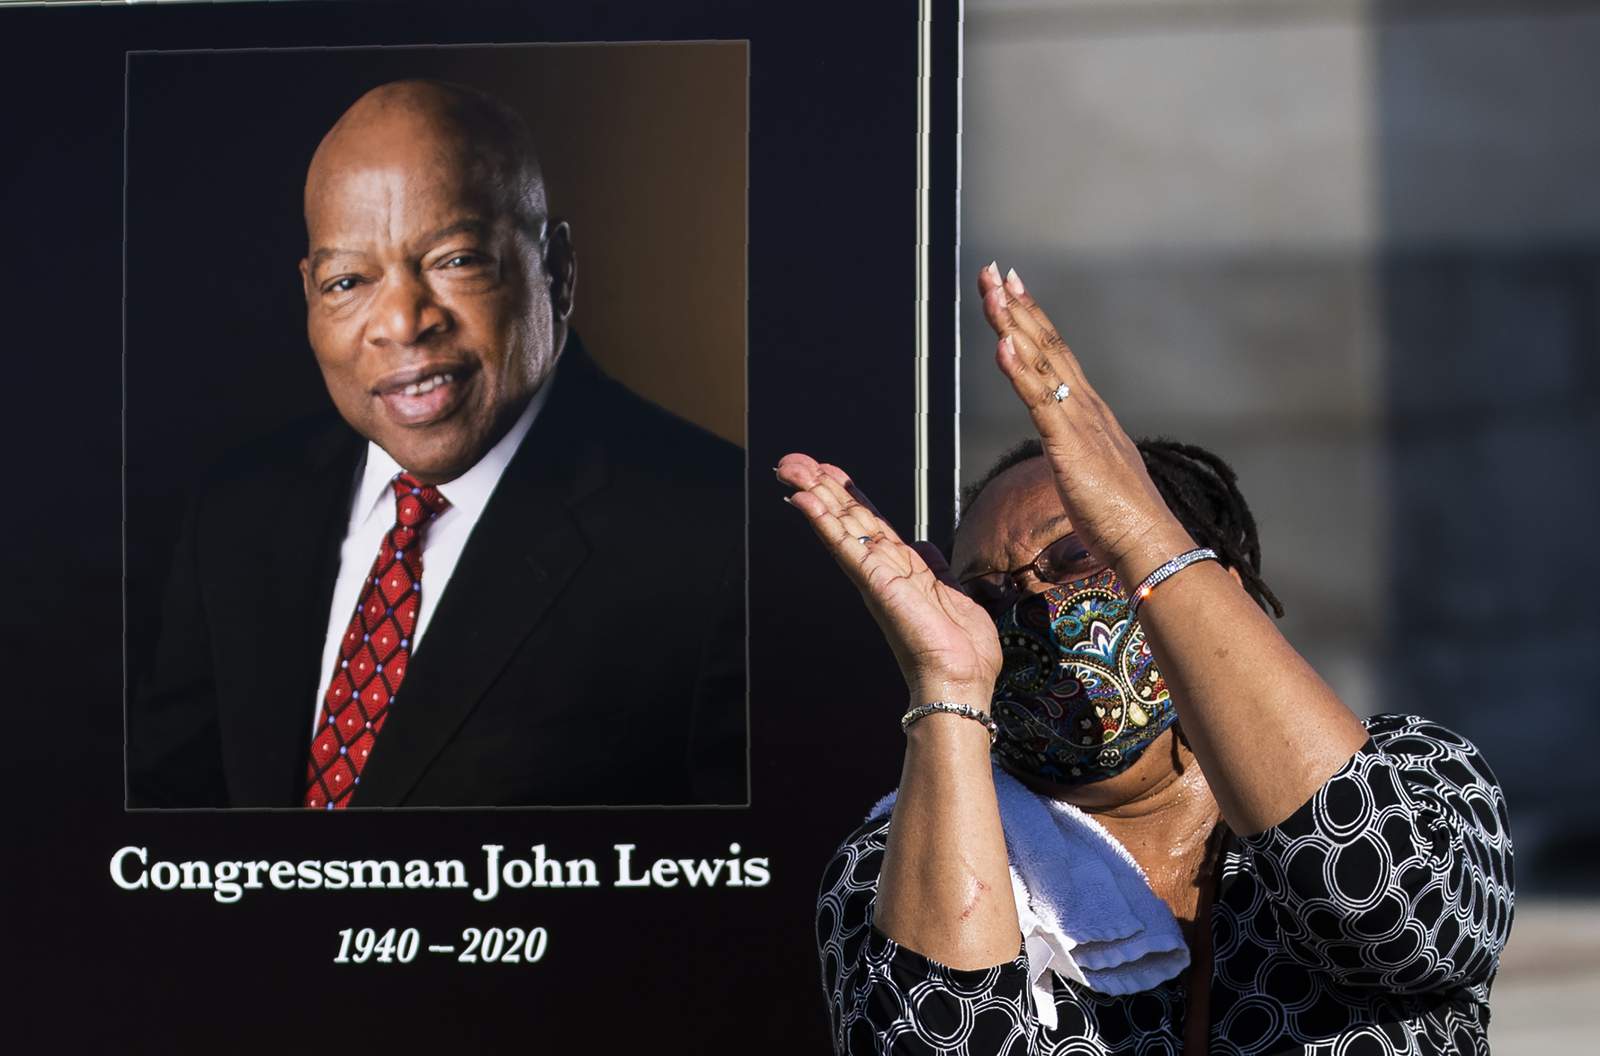 7 seek to follow Lewis in House, but long-term prospects dim